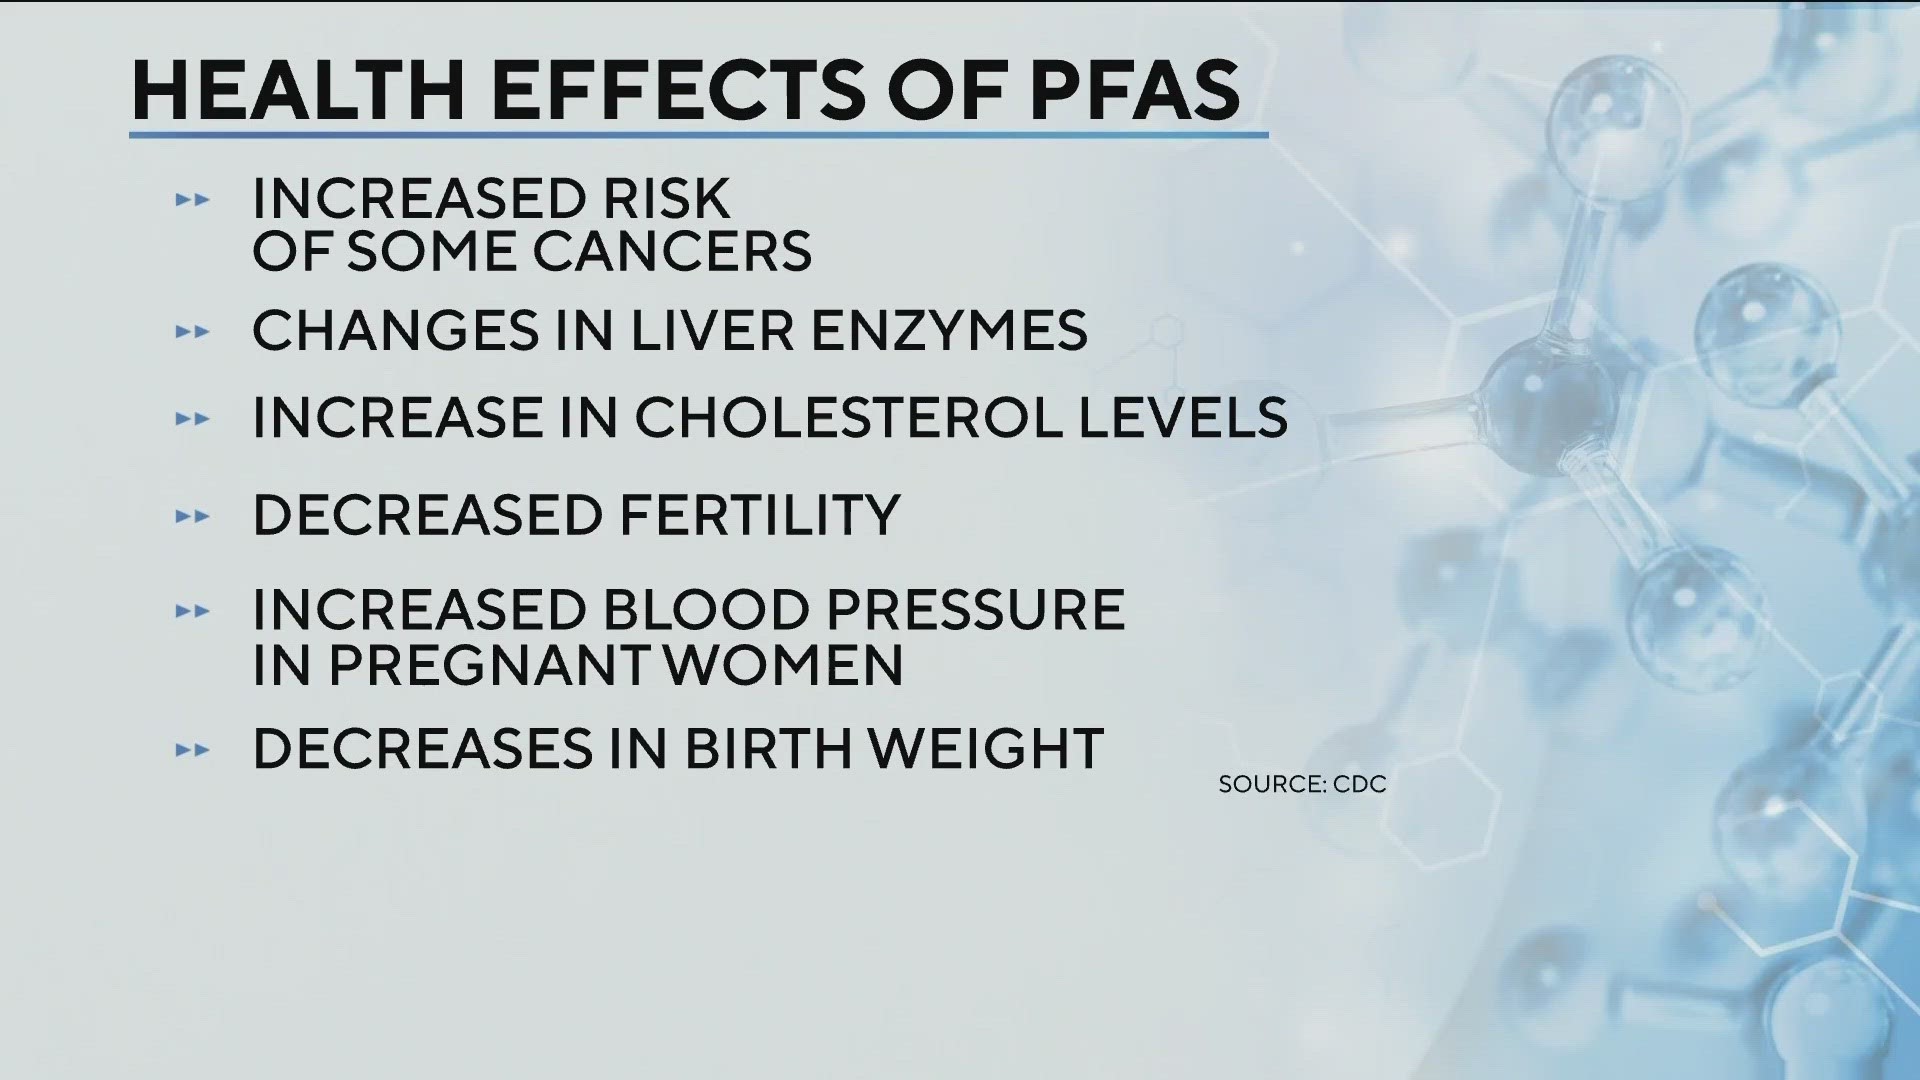 PFAS chemicals are hazardous because they don’t degrade in the environment and are linked to health issues such as low birth weight and kidney cancer.